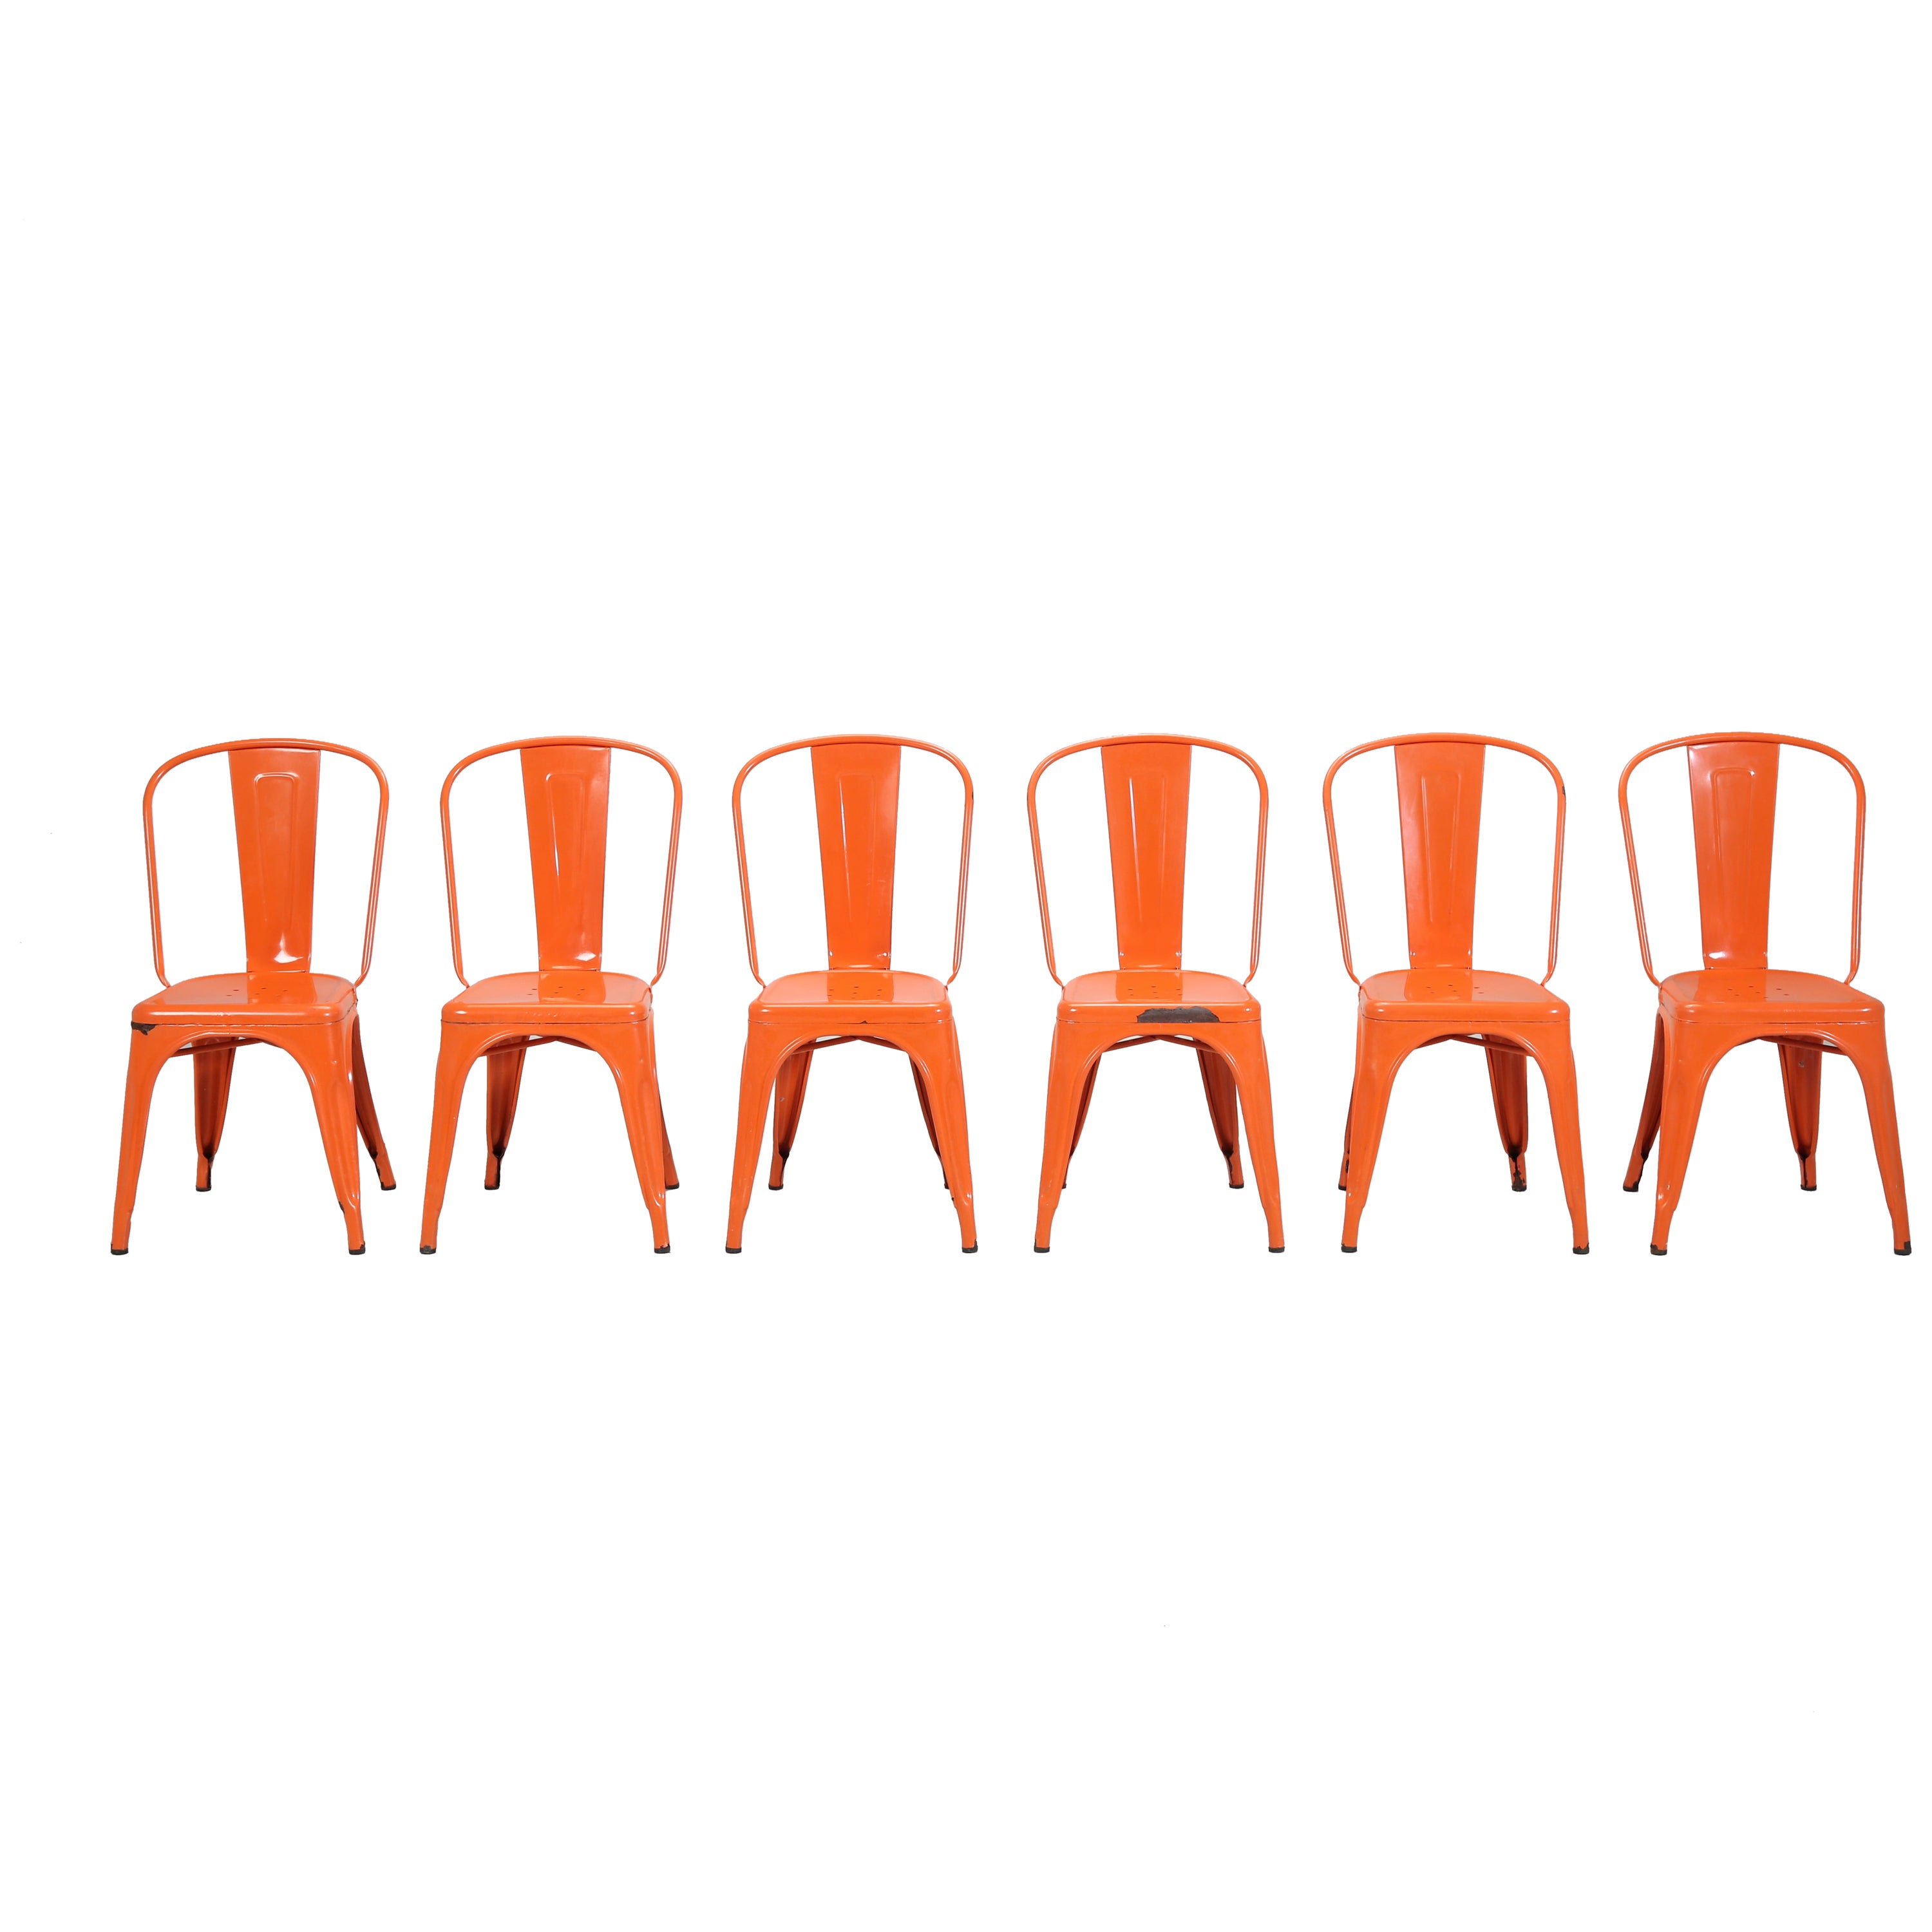 Tolix Vintage Orange Steel Stacking Chairs Hand-Made France Over (1300) in Stock